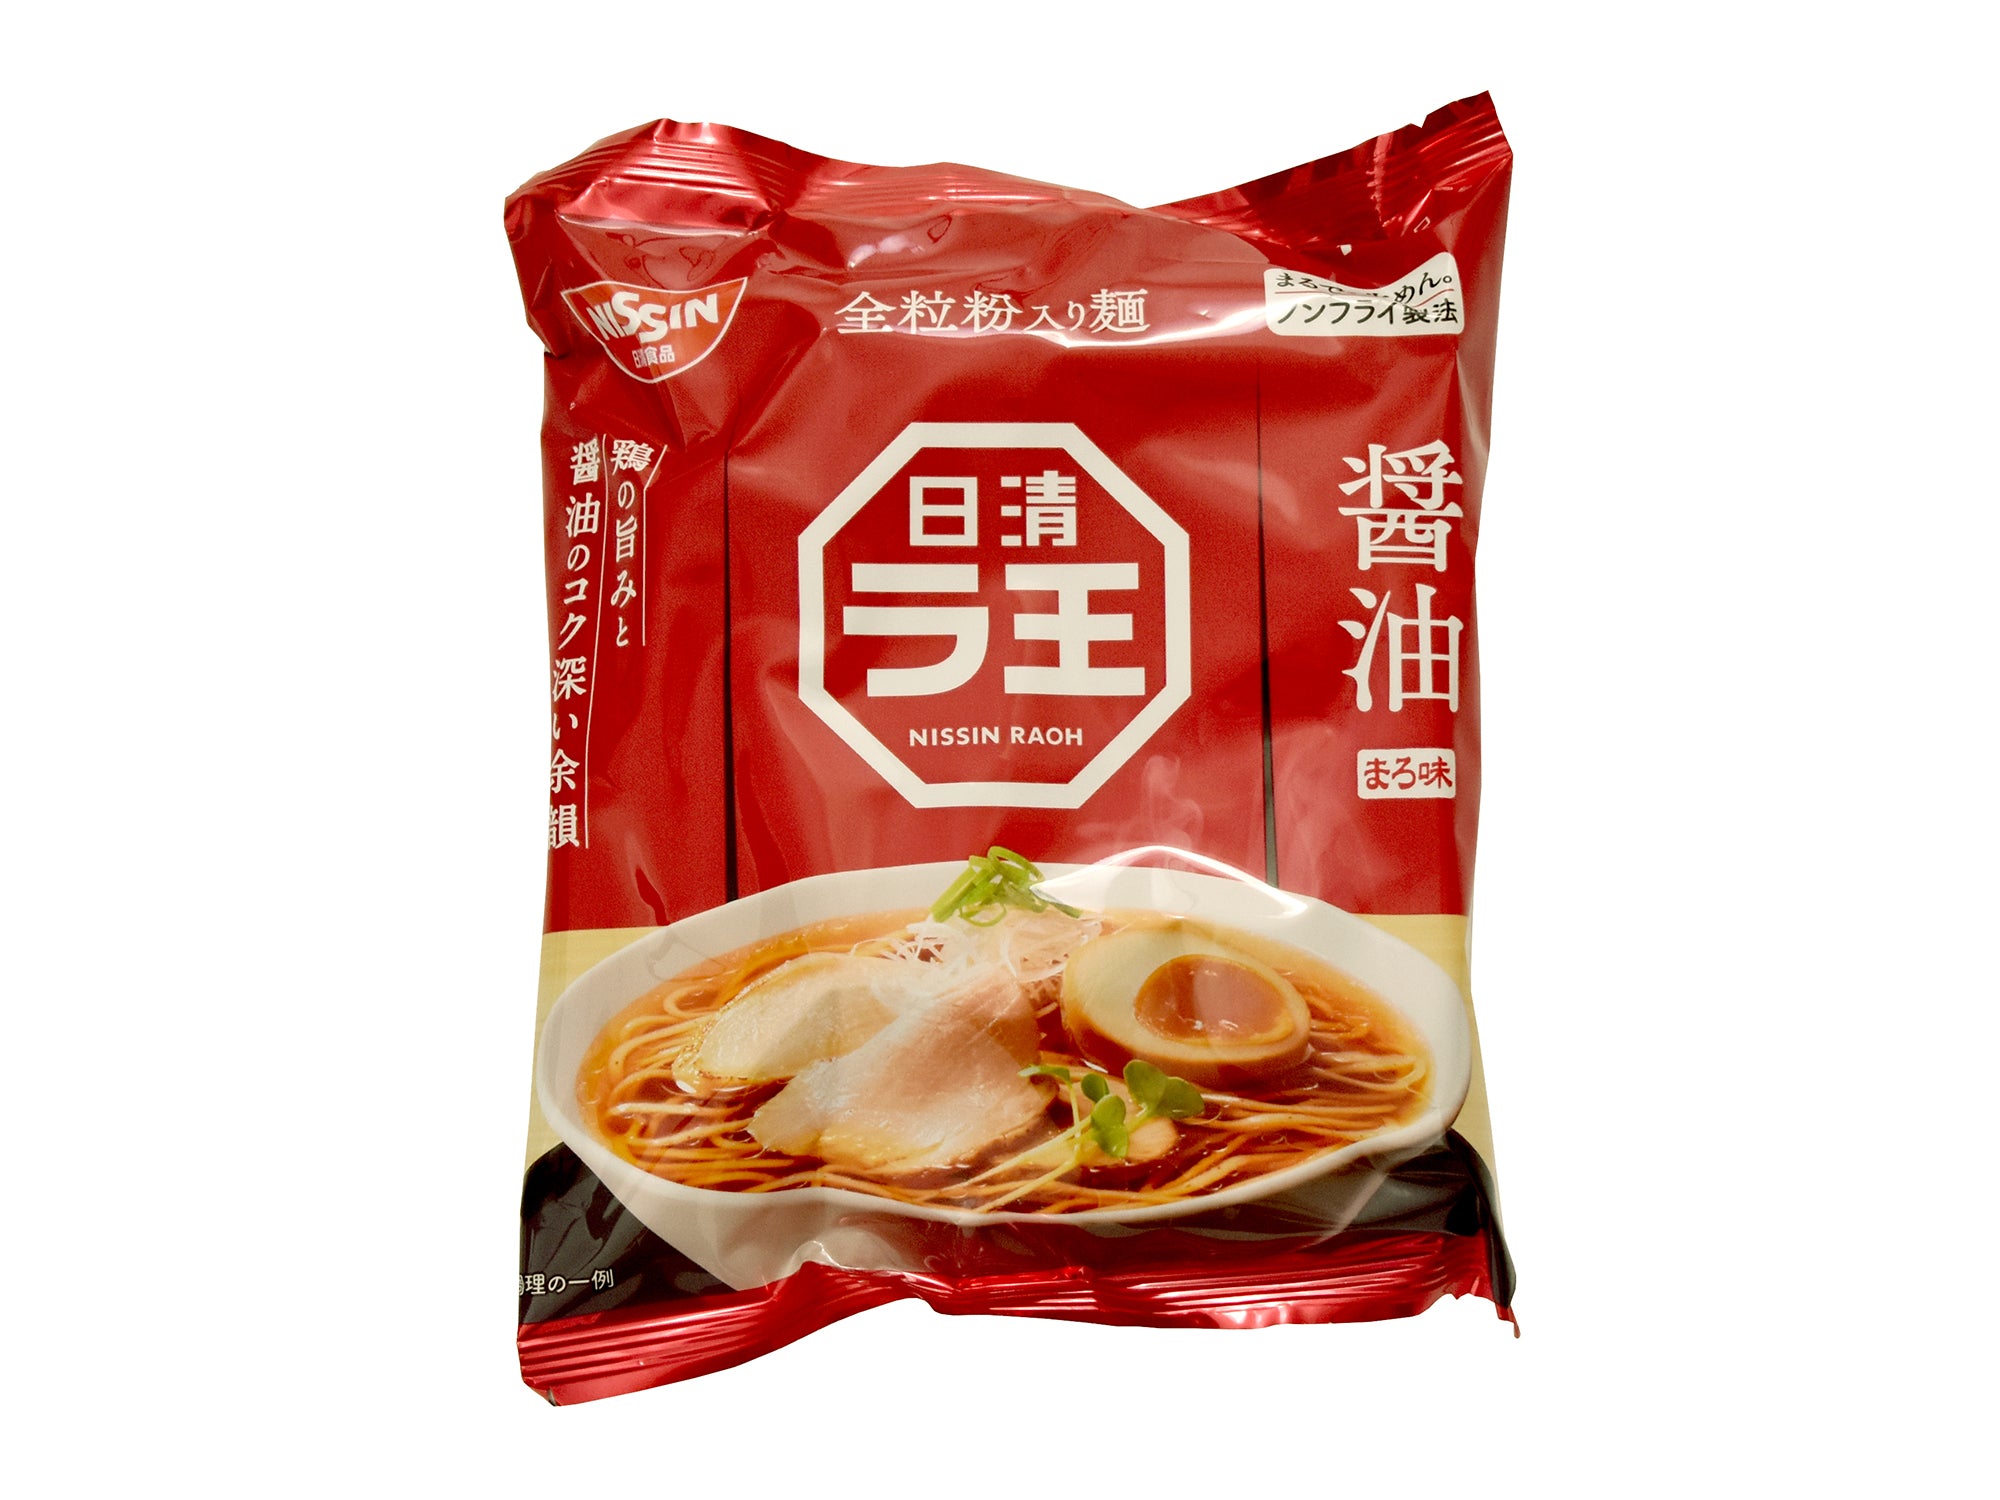 Nissin Raoh Shoyu Review: This Ramen Will Become Your Next Favorite